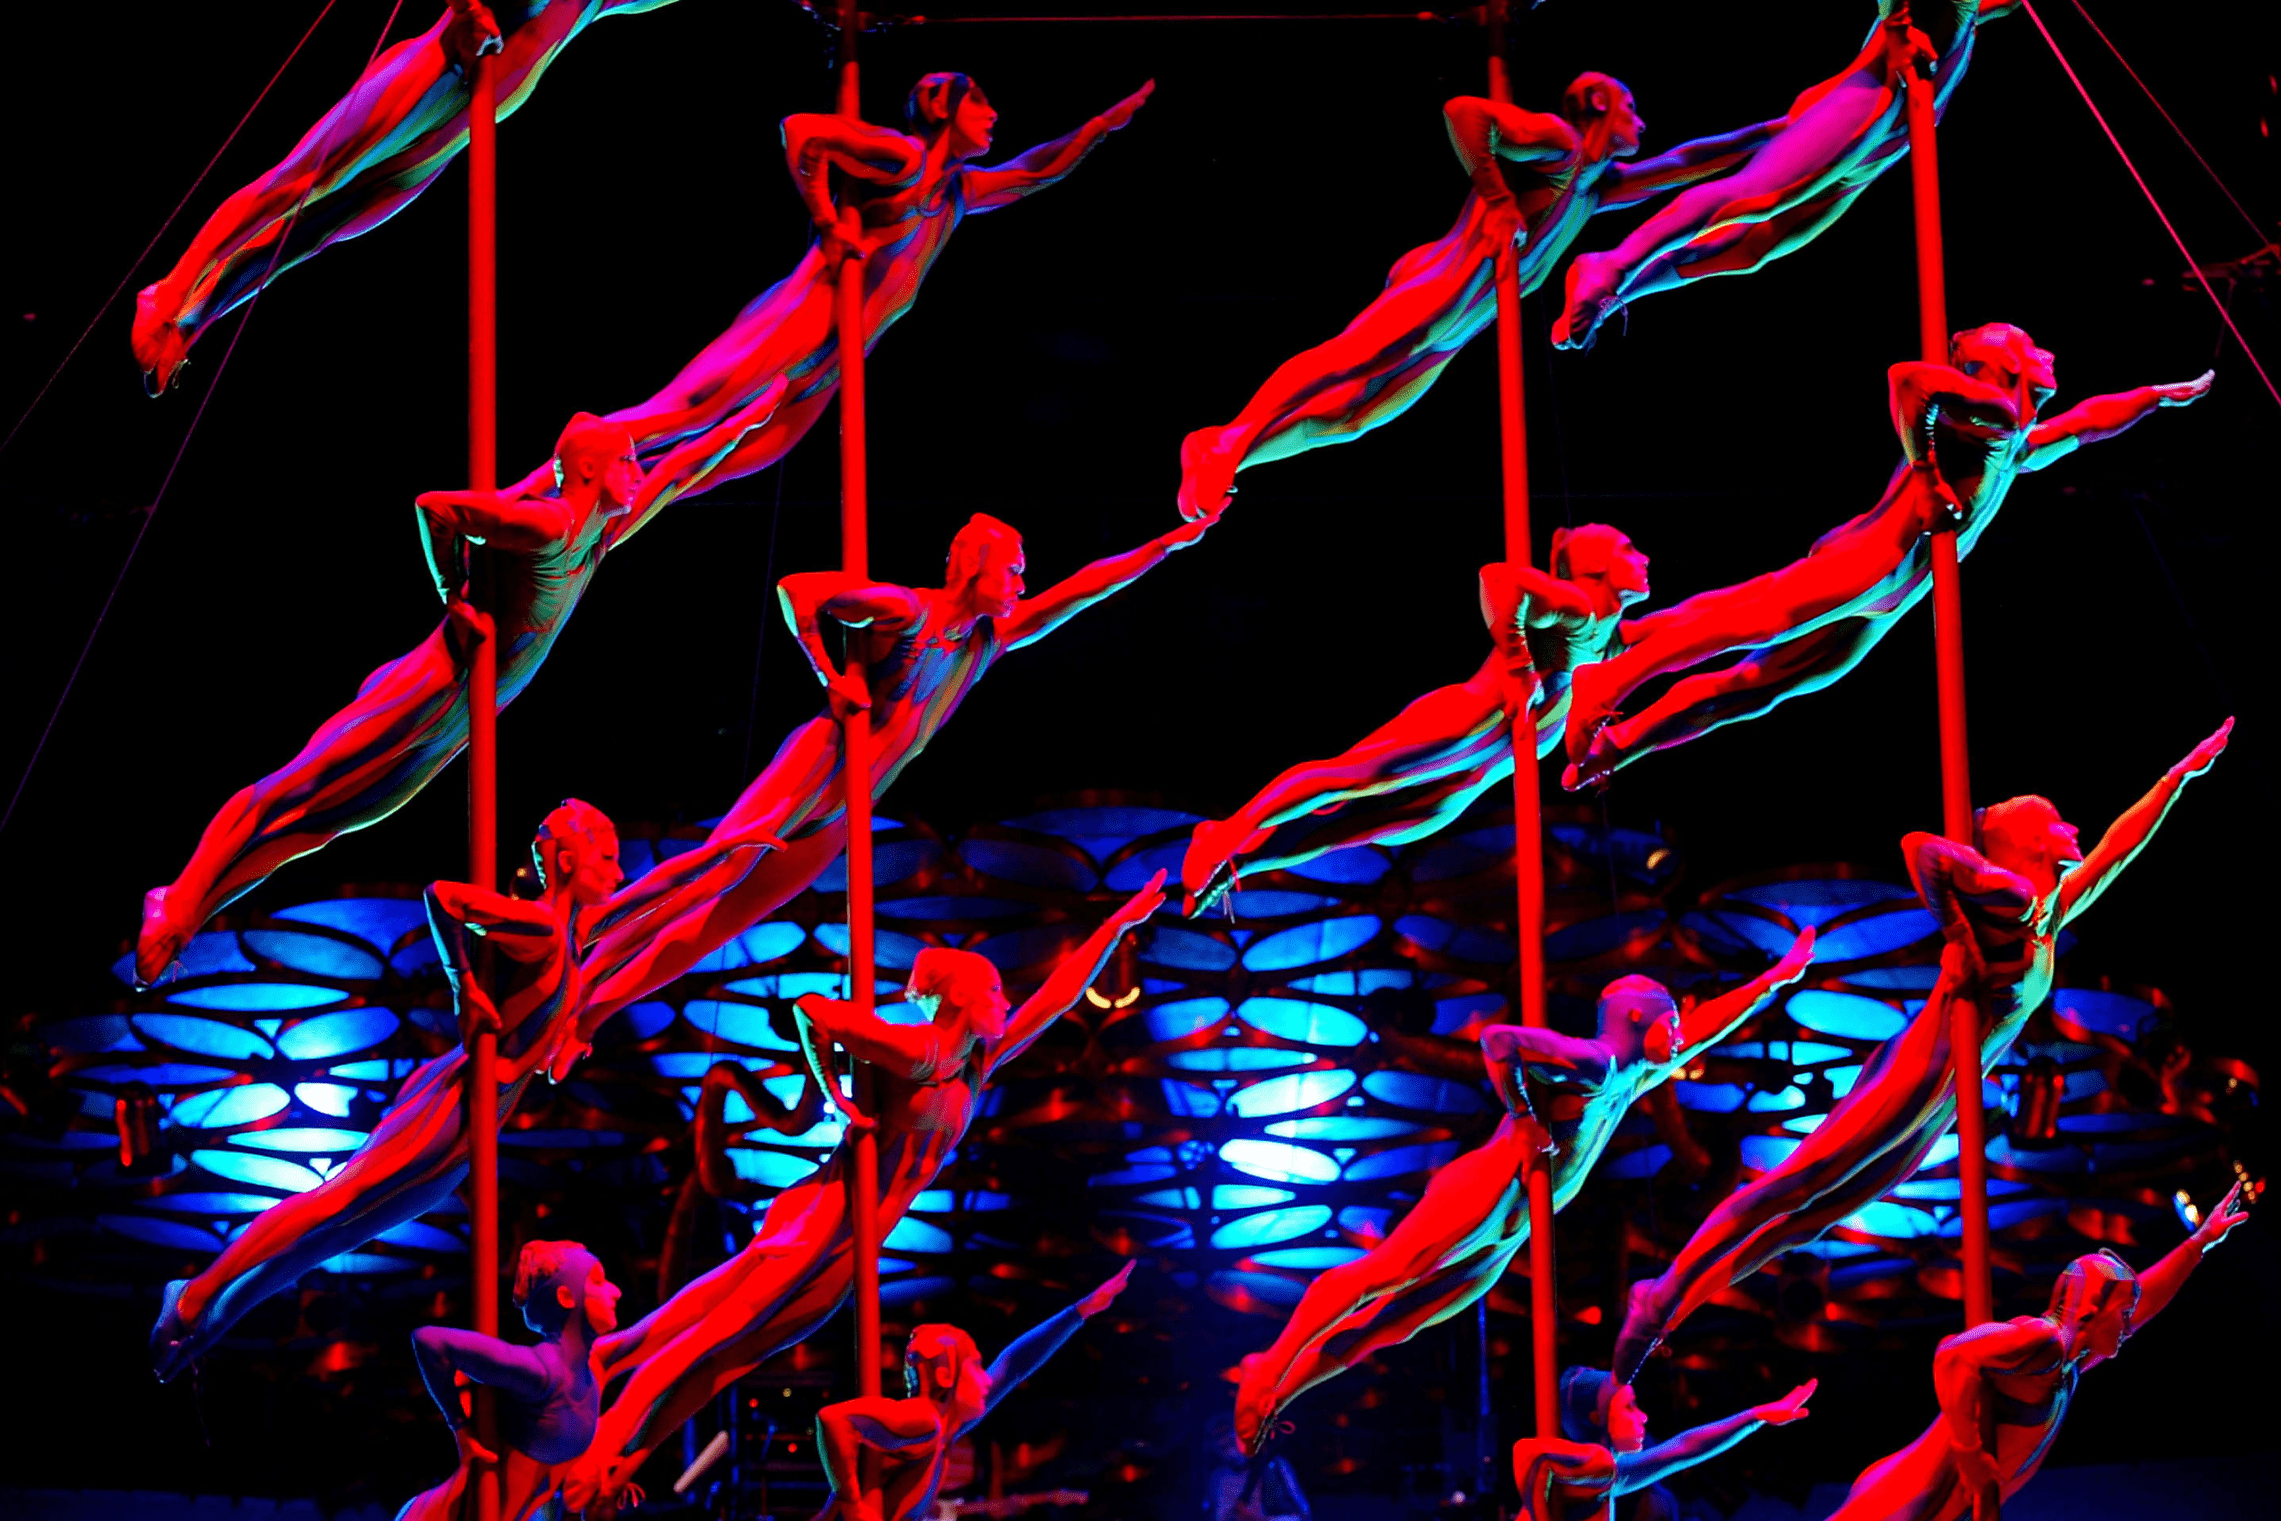 An image of cirque du solei performers.